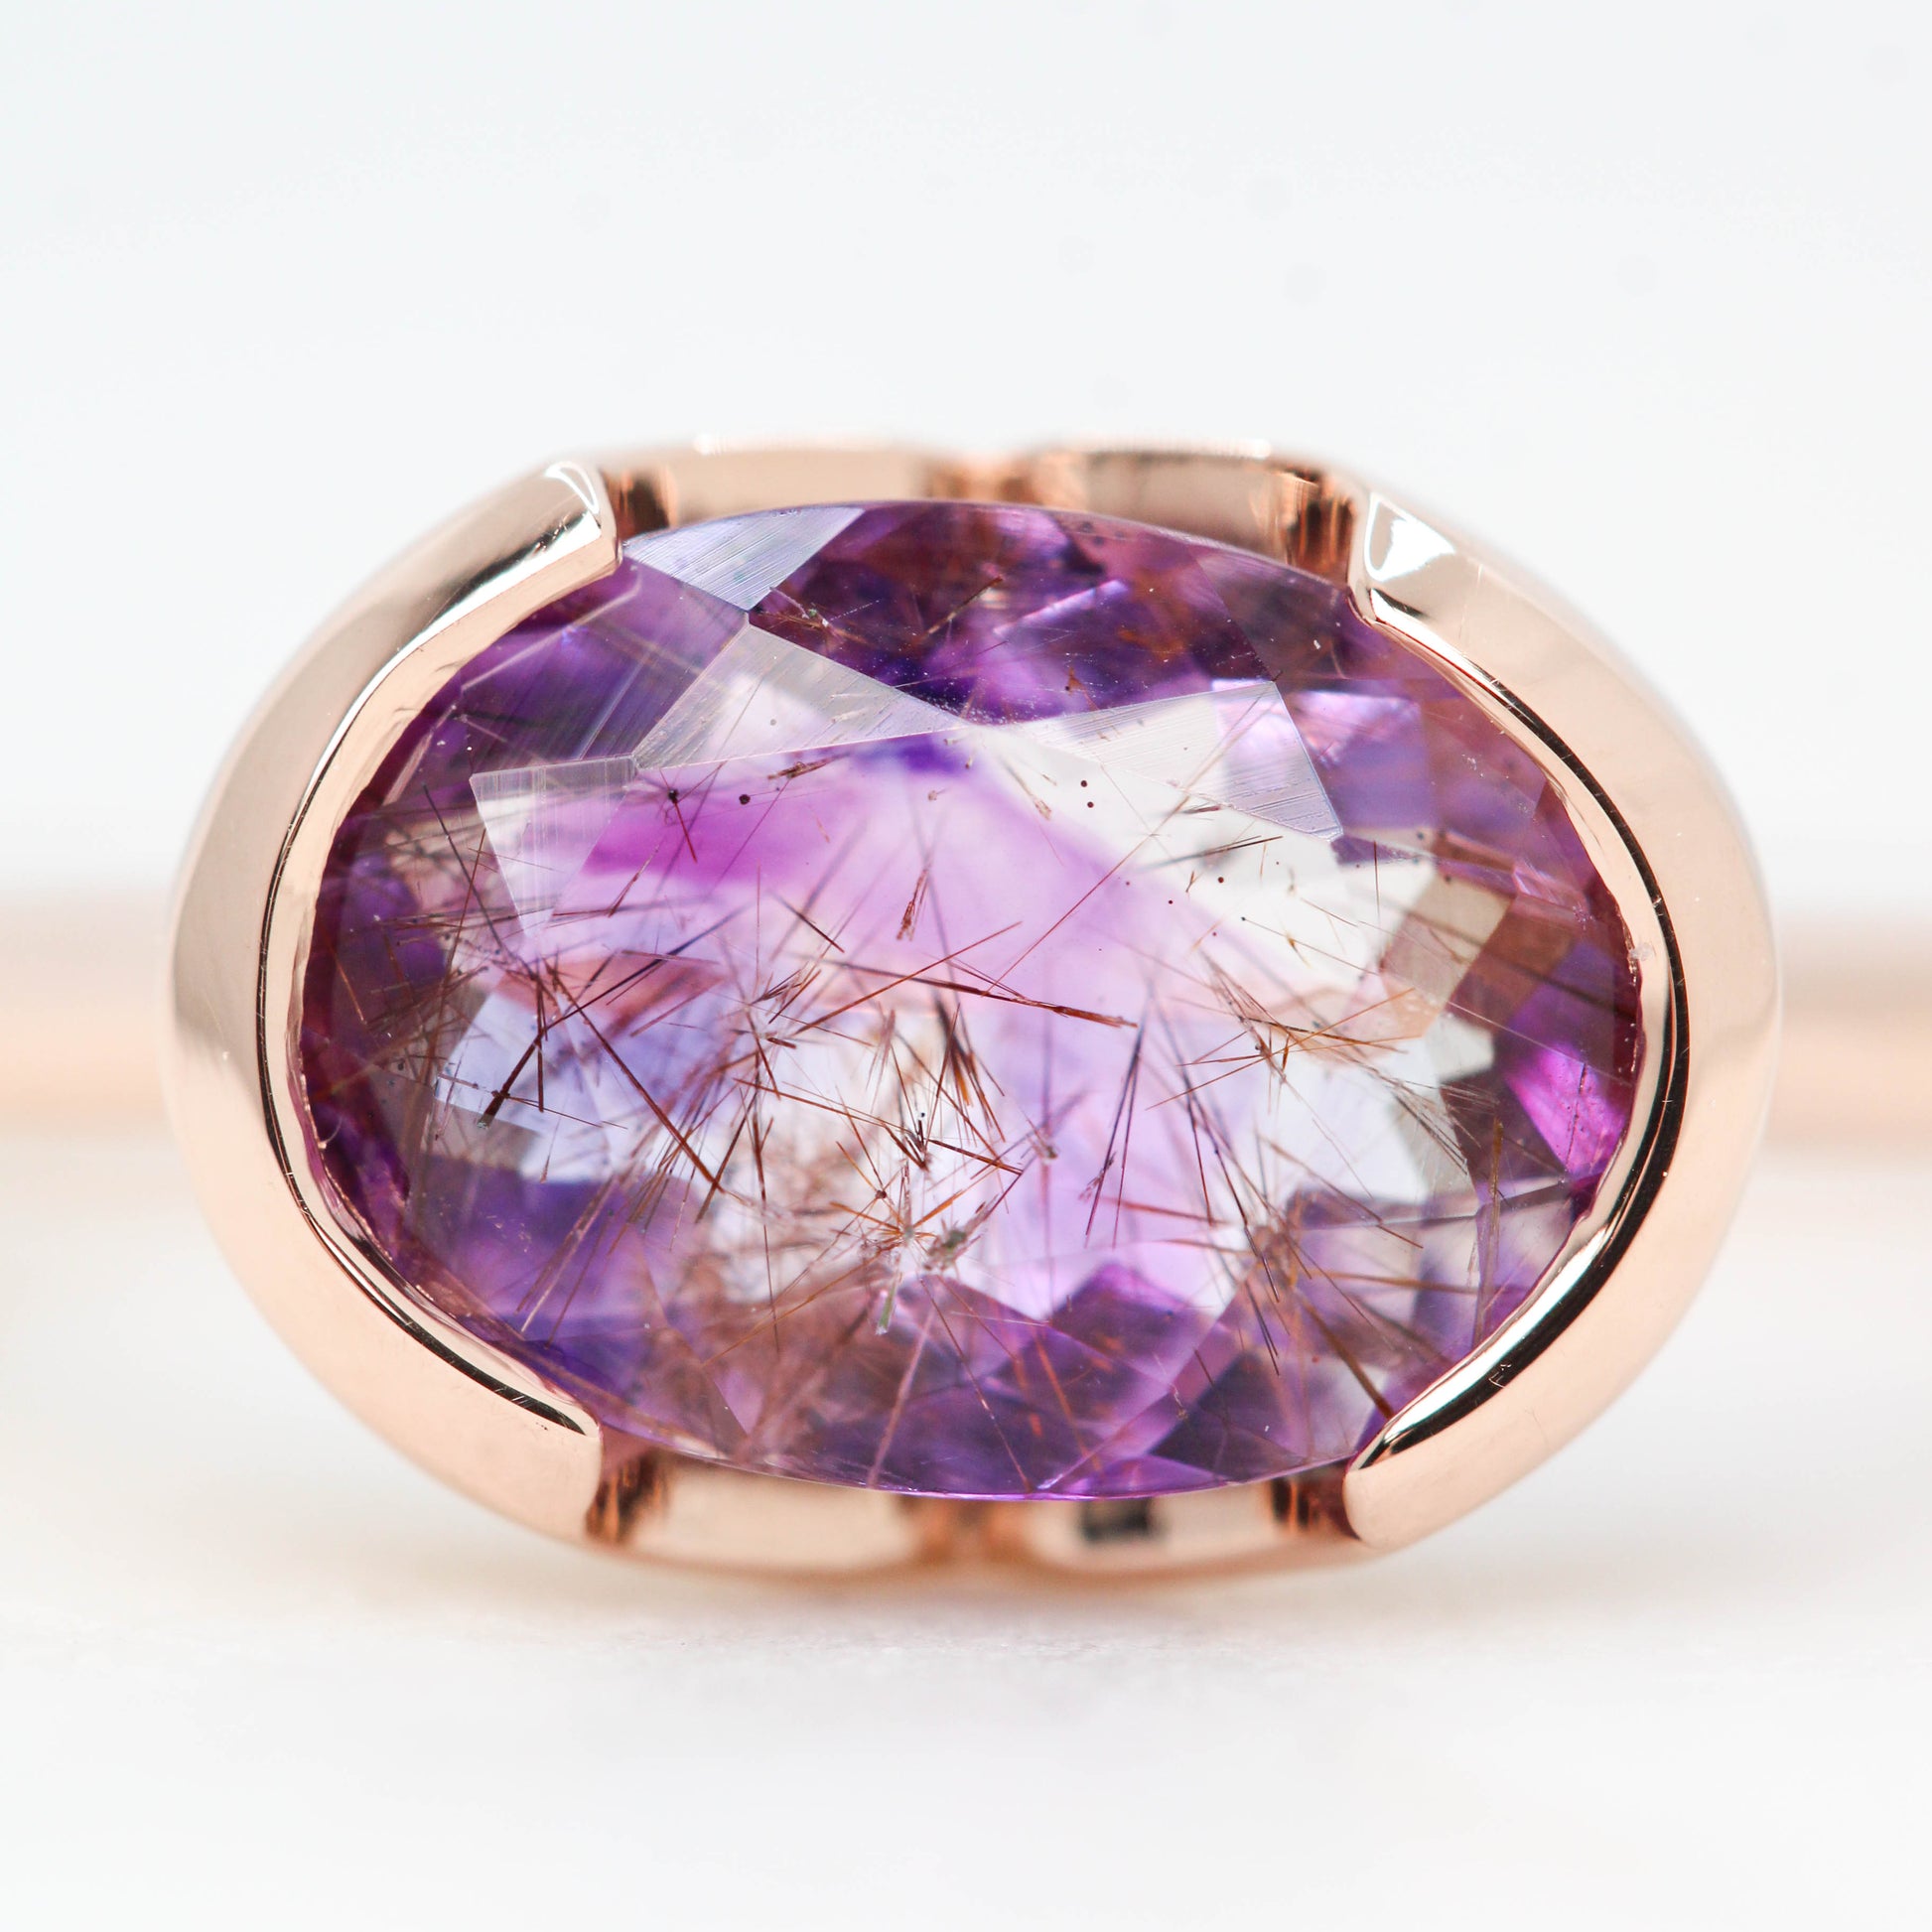 Verbena Ring with a 1.80 Carat Purple Melody Quartz in 14k Rose Gold - Ready to Size and Ship - Midwinter Co. Alternative Bridal Rings and Modern Fine Jewelry